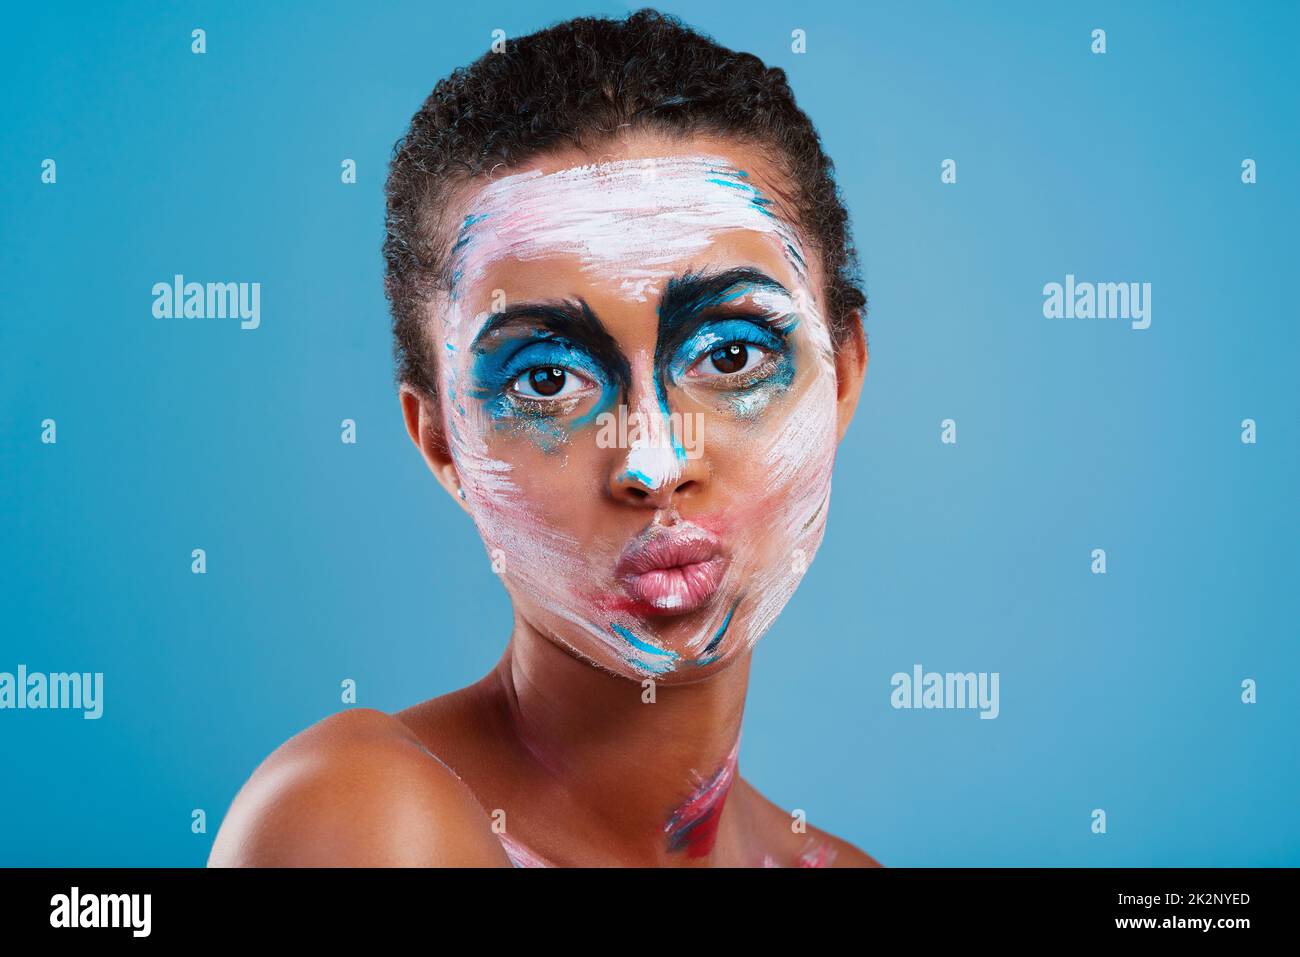 More than just a pretty face. Studio portrait of a beautiful young woman covered in face paint posing against a blue background. Stock Photo